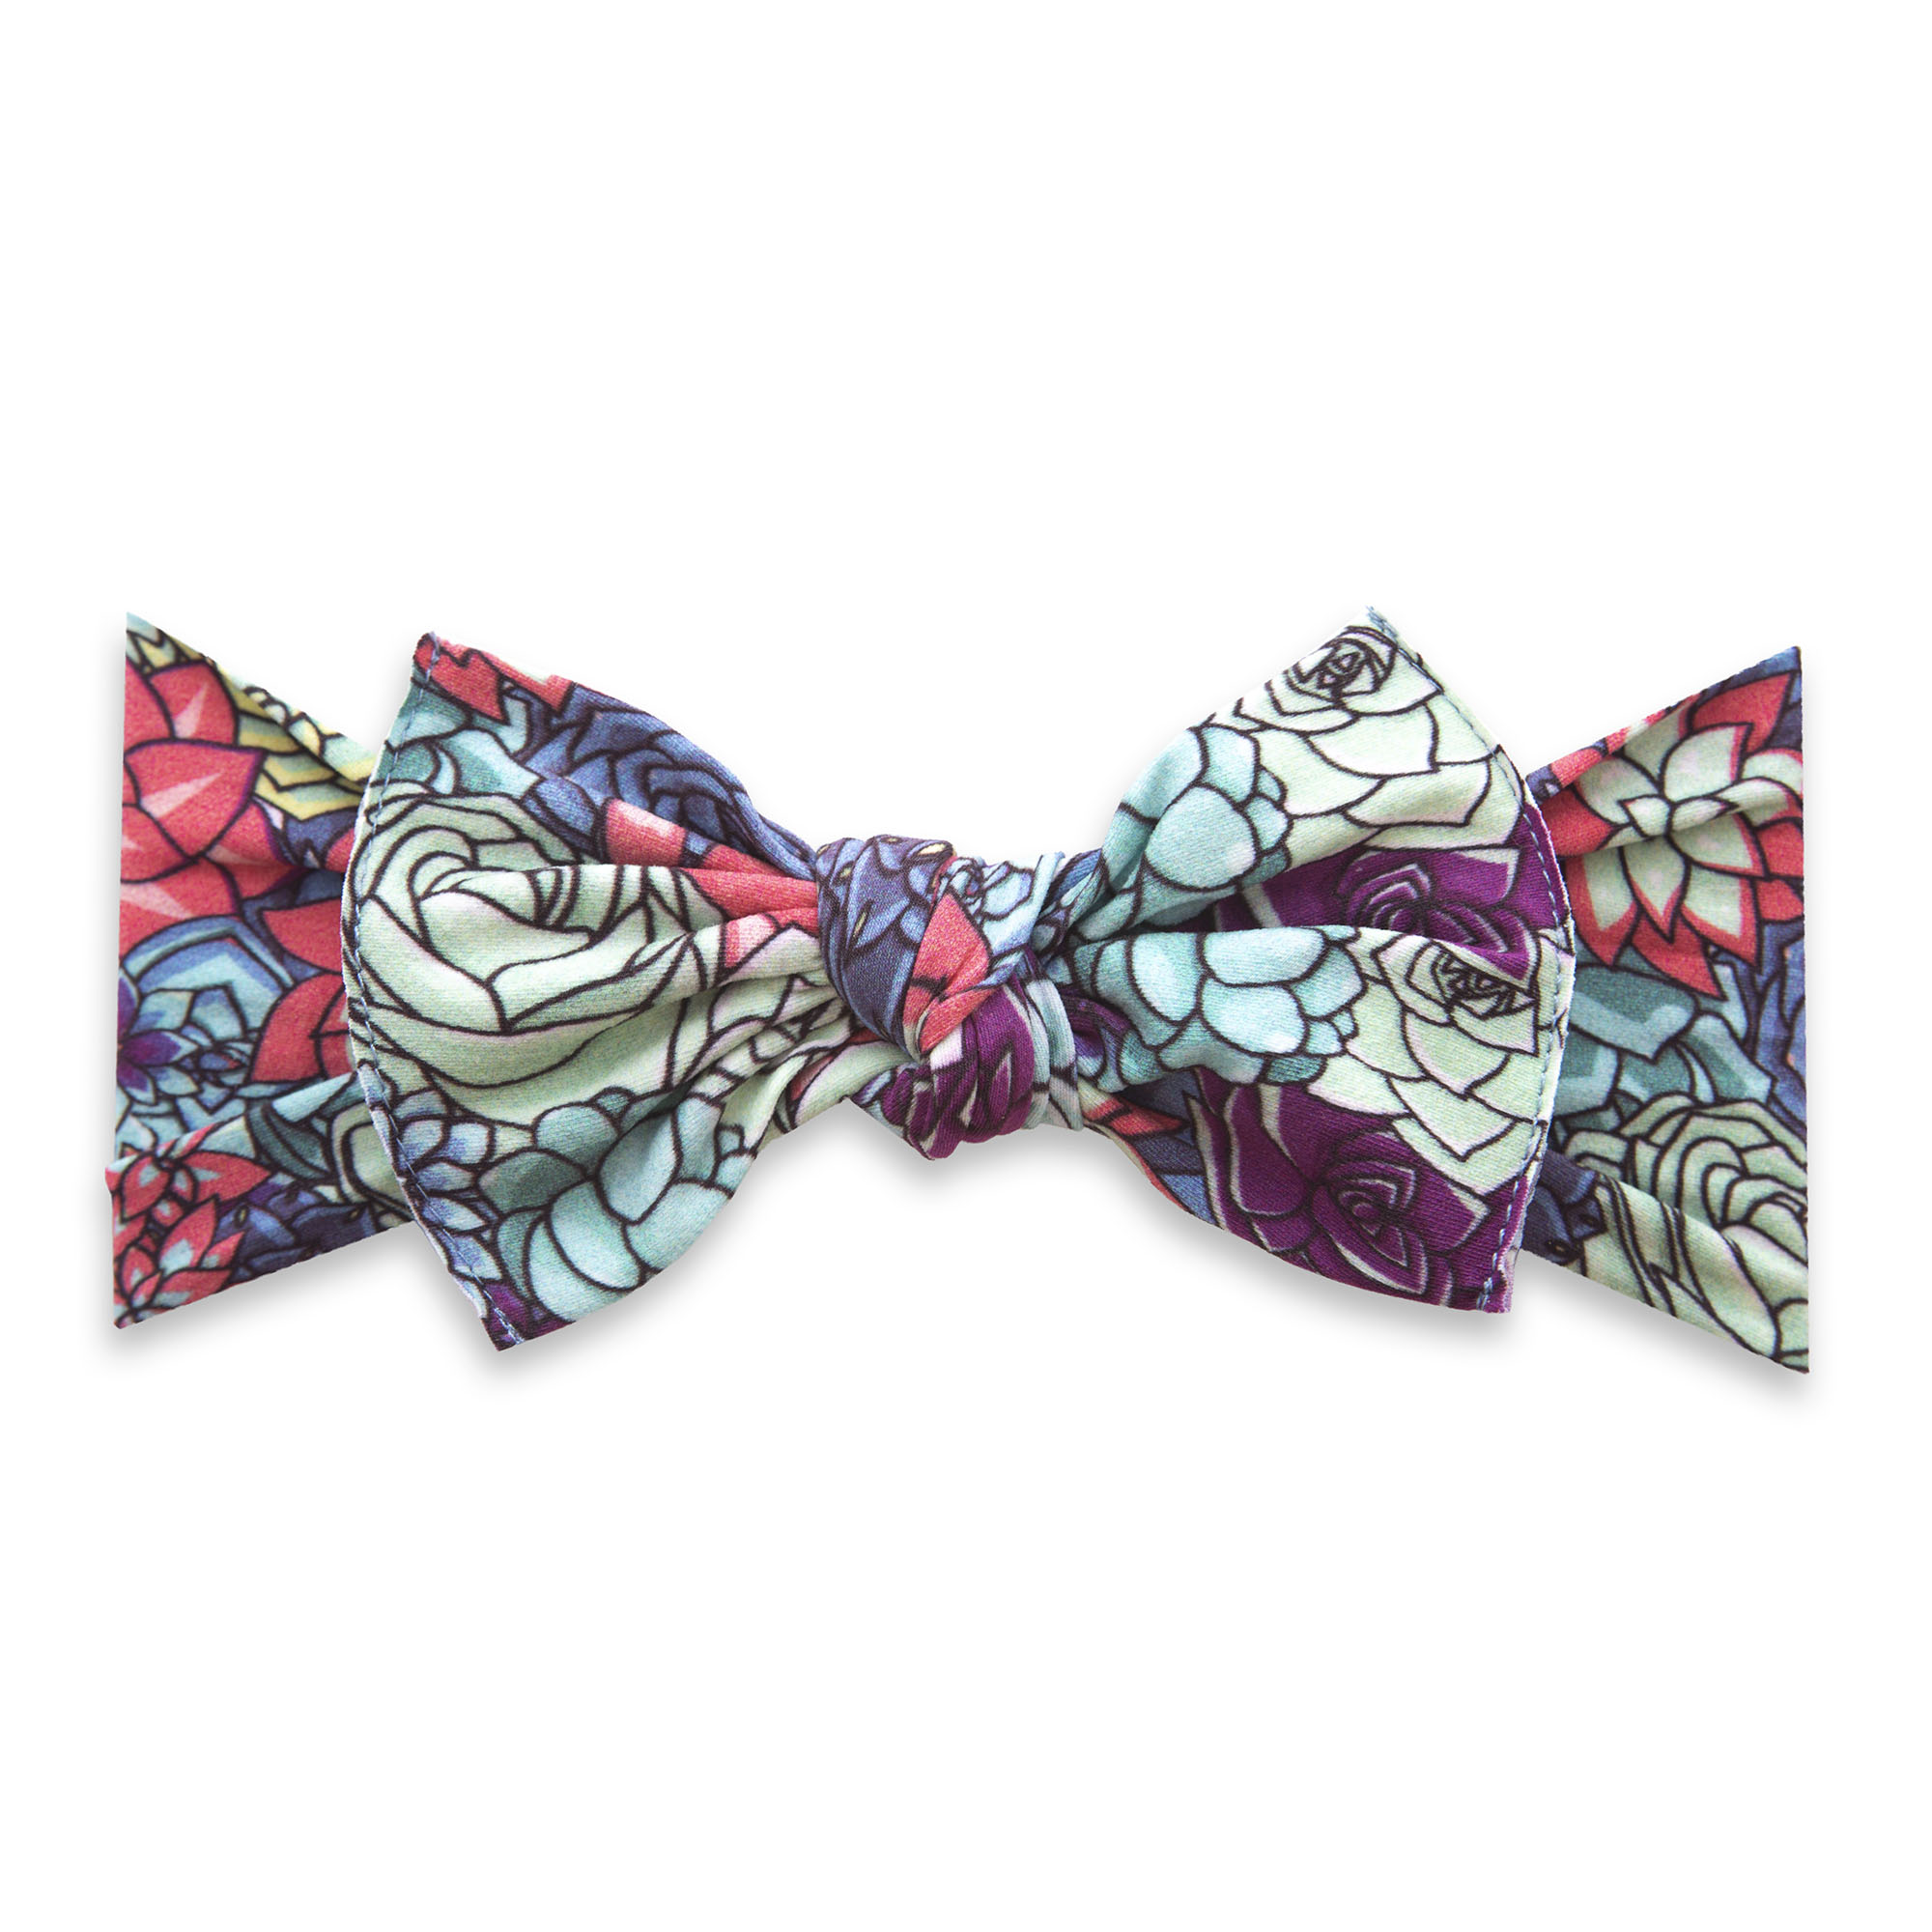 Baby Bling Bows Printed Knot Headband in Agave Garden